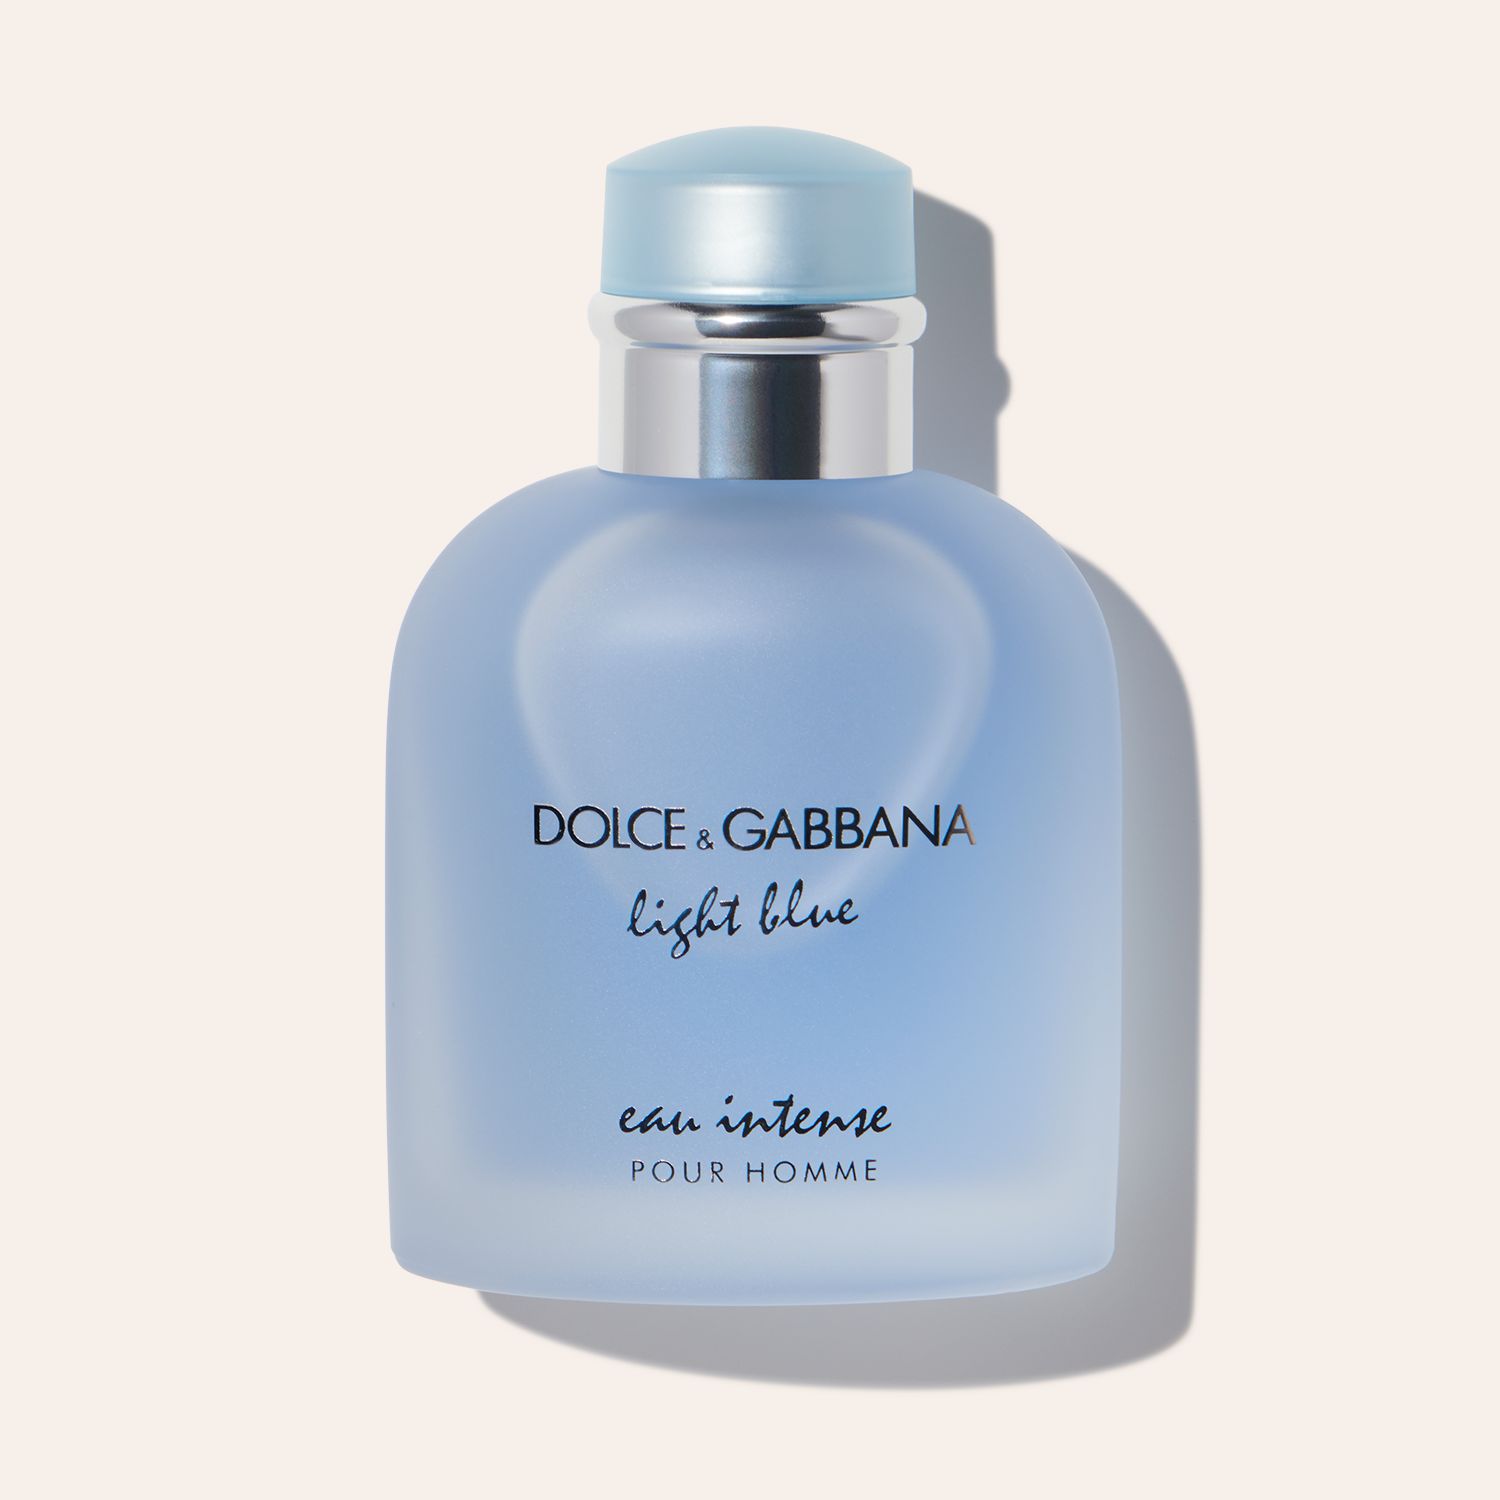 Buy Dolce and Gabbana Light Blue at Scentbird for $16.95